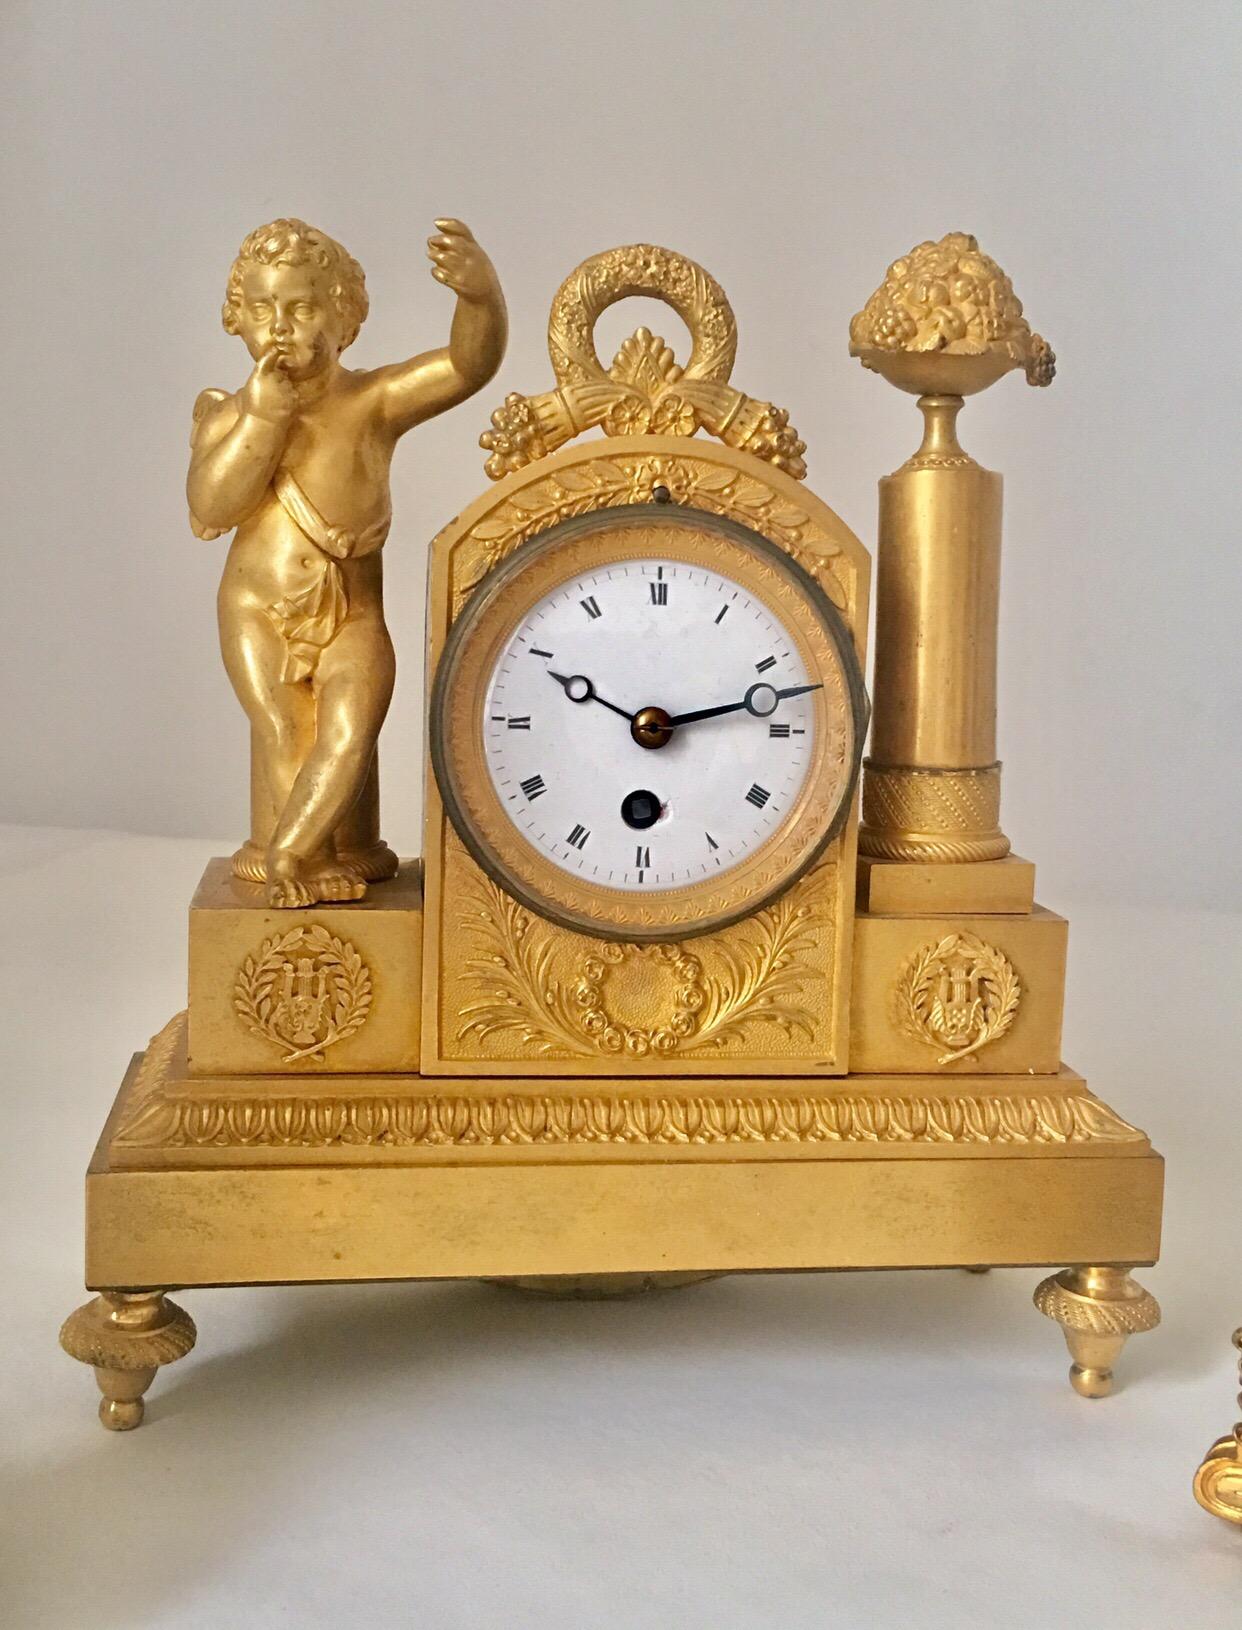 A very fine early 19th century miniature French Empire period 3-pieces set cherub clock

The clock with an arched case raised on a plinth base and four toupie feet, mounted with a figure of cupid to one side and a cylindrical pedestal supporting a